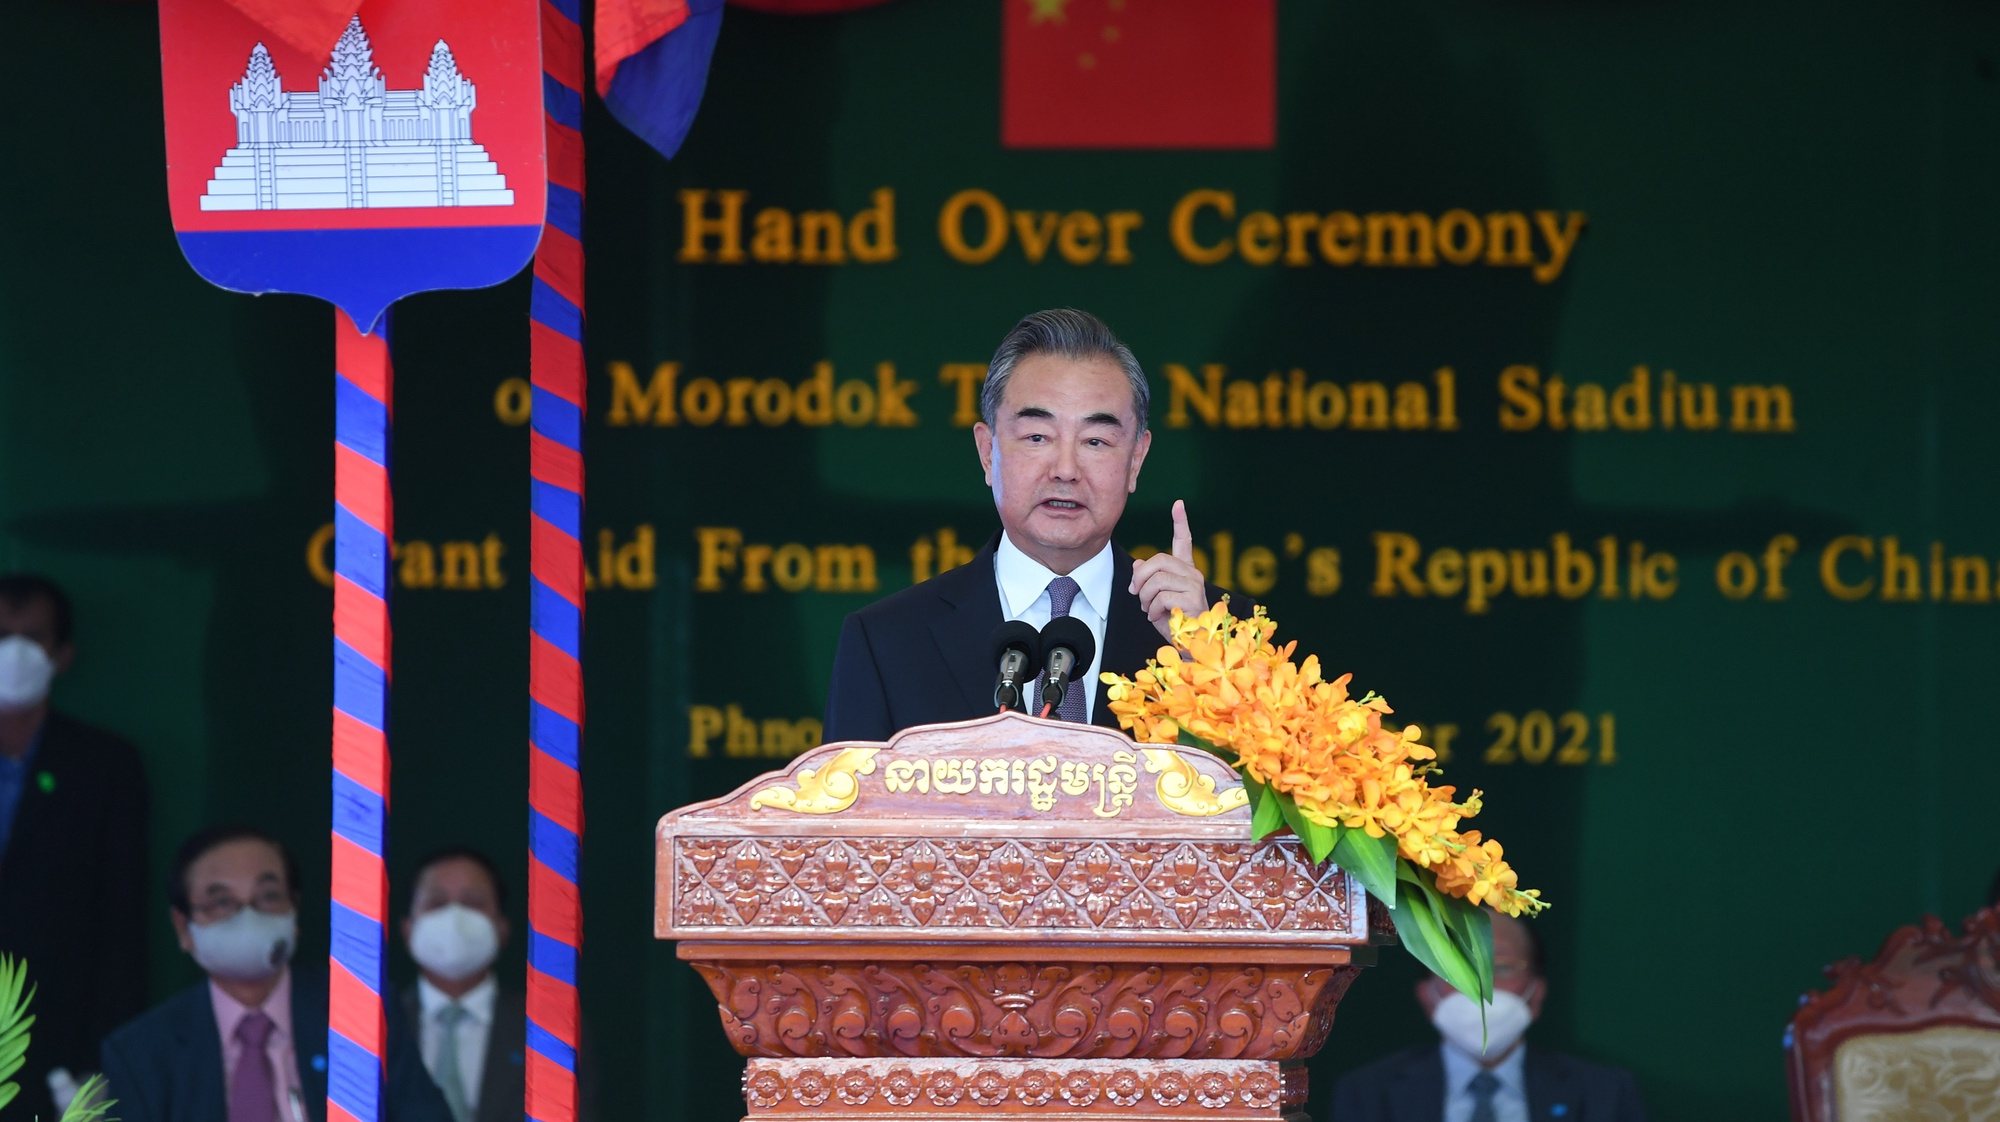 epa09463447 Chinese Foreign Minister Wang Yi speaks during a handover ceremony of the Morodok Techo National Stadium in Phnom P?enh, Cambodia, 12 September 2021. Wang Yi is on an official visit to Cambodia, during which he met with Cambodian Prime Minister Hun Sen and attended a handover ceremony of the Morodok Techo National Stadium funded by the Chinese government.  EPA/TANG CHHIN SOTHY / POOL